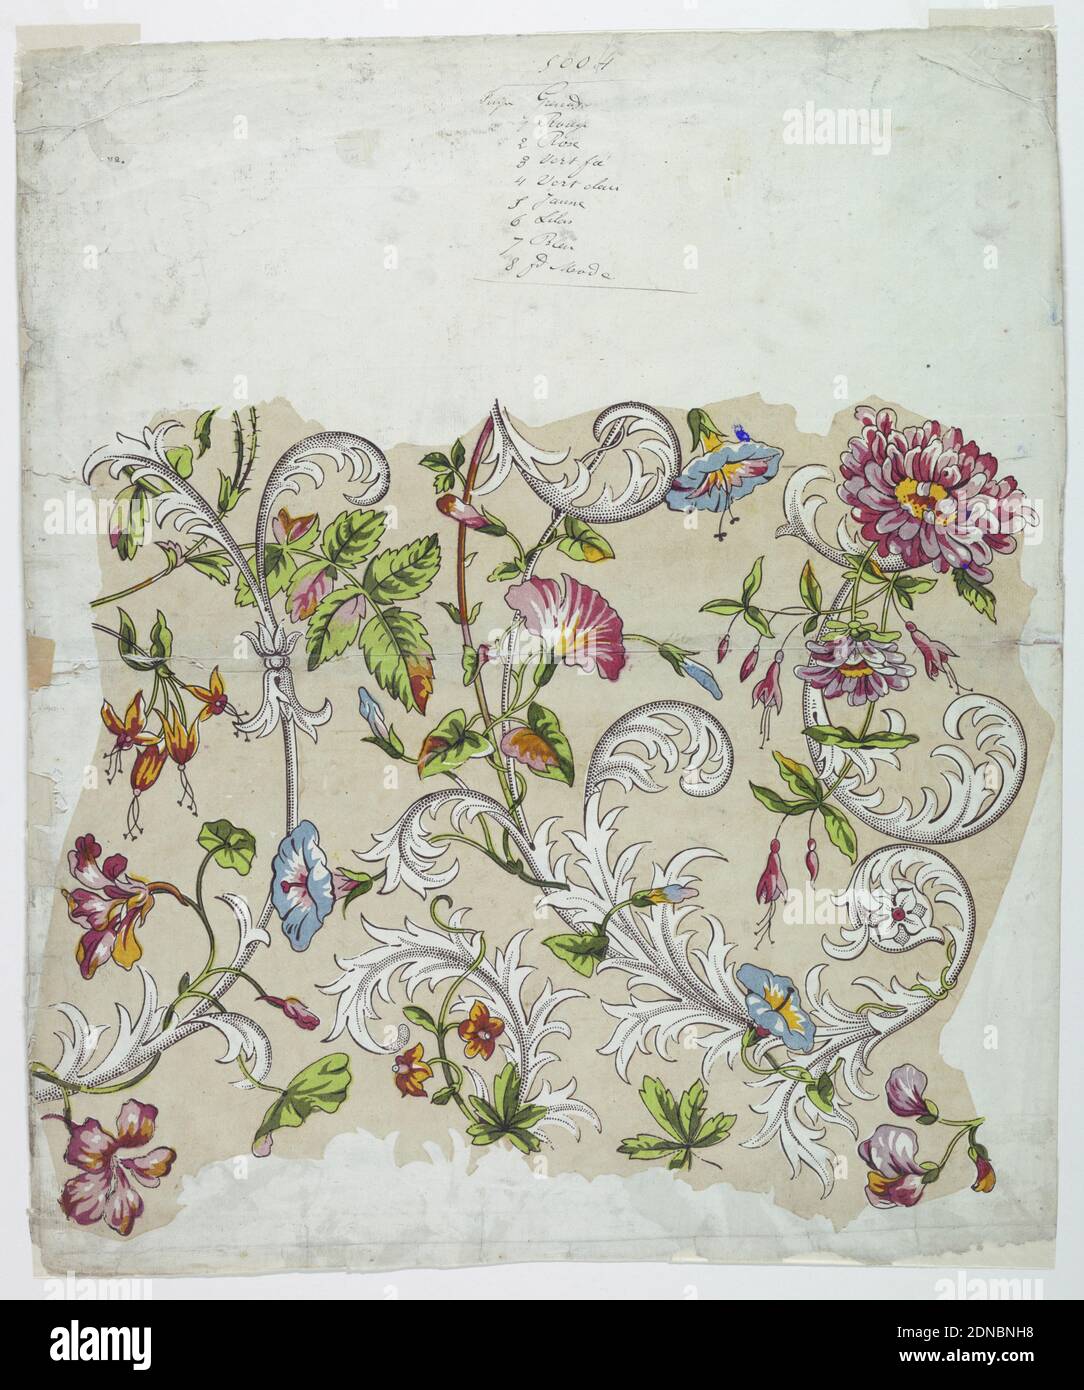 Trial Proof for a Flower Chintz, Woodcut in multicolored inks on tan ground on white paper, Intertwined meanders of tulips, morning glories, carnations and roses among stylized acanthus leaves with picotage effect. Printed in red, yellow, green, blue, lavender, and dark brown., France, 1820–30, textile designs, Print Stock Photo